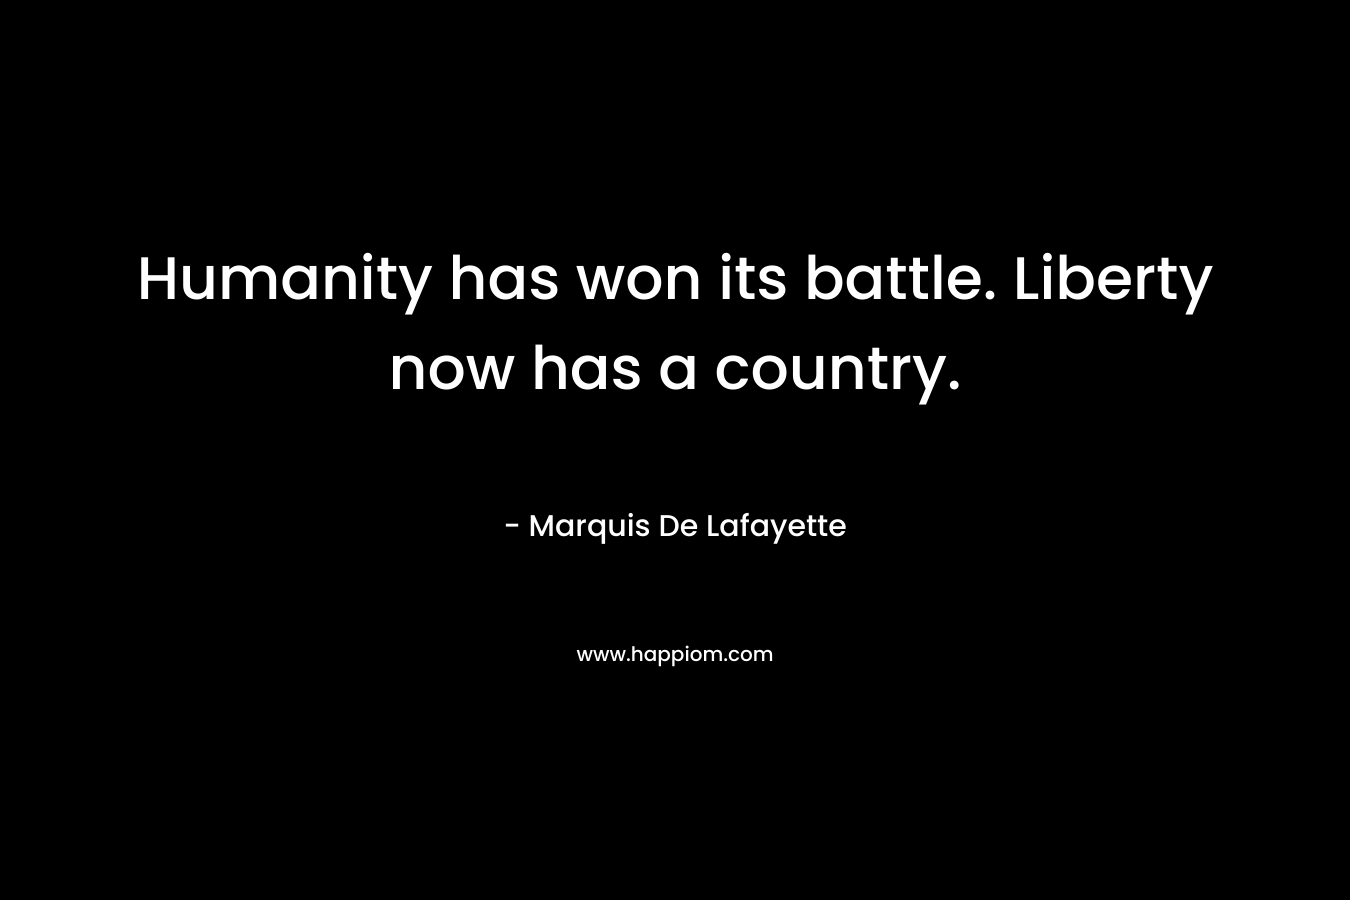 Humanity has won its battle. Liberty now has a country. – Marquis De Lafayette